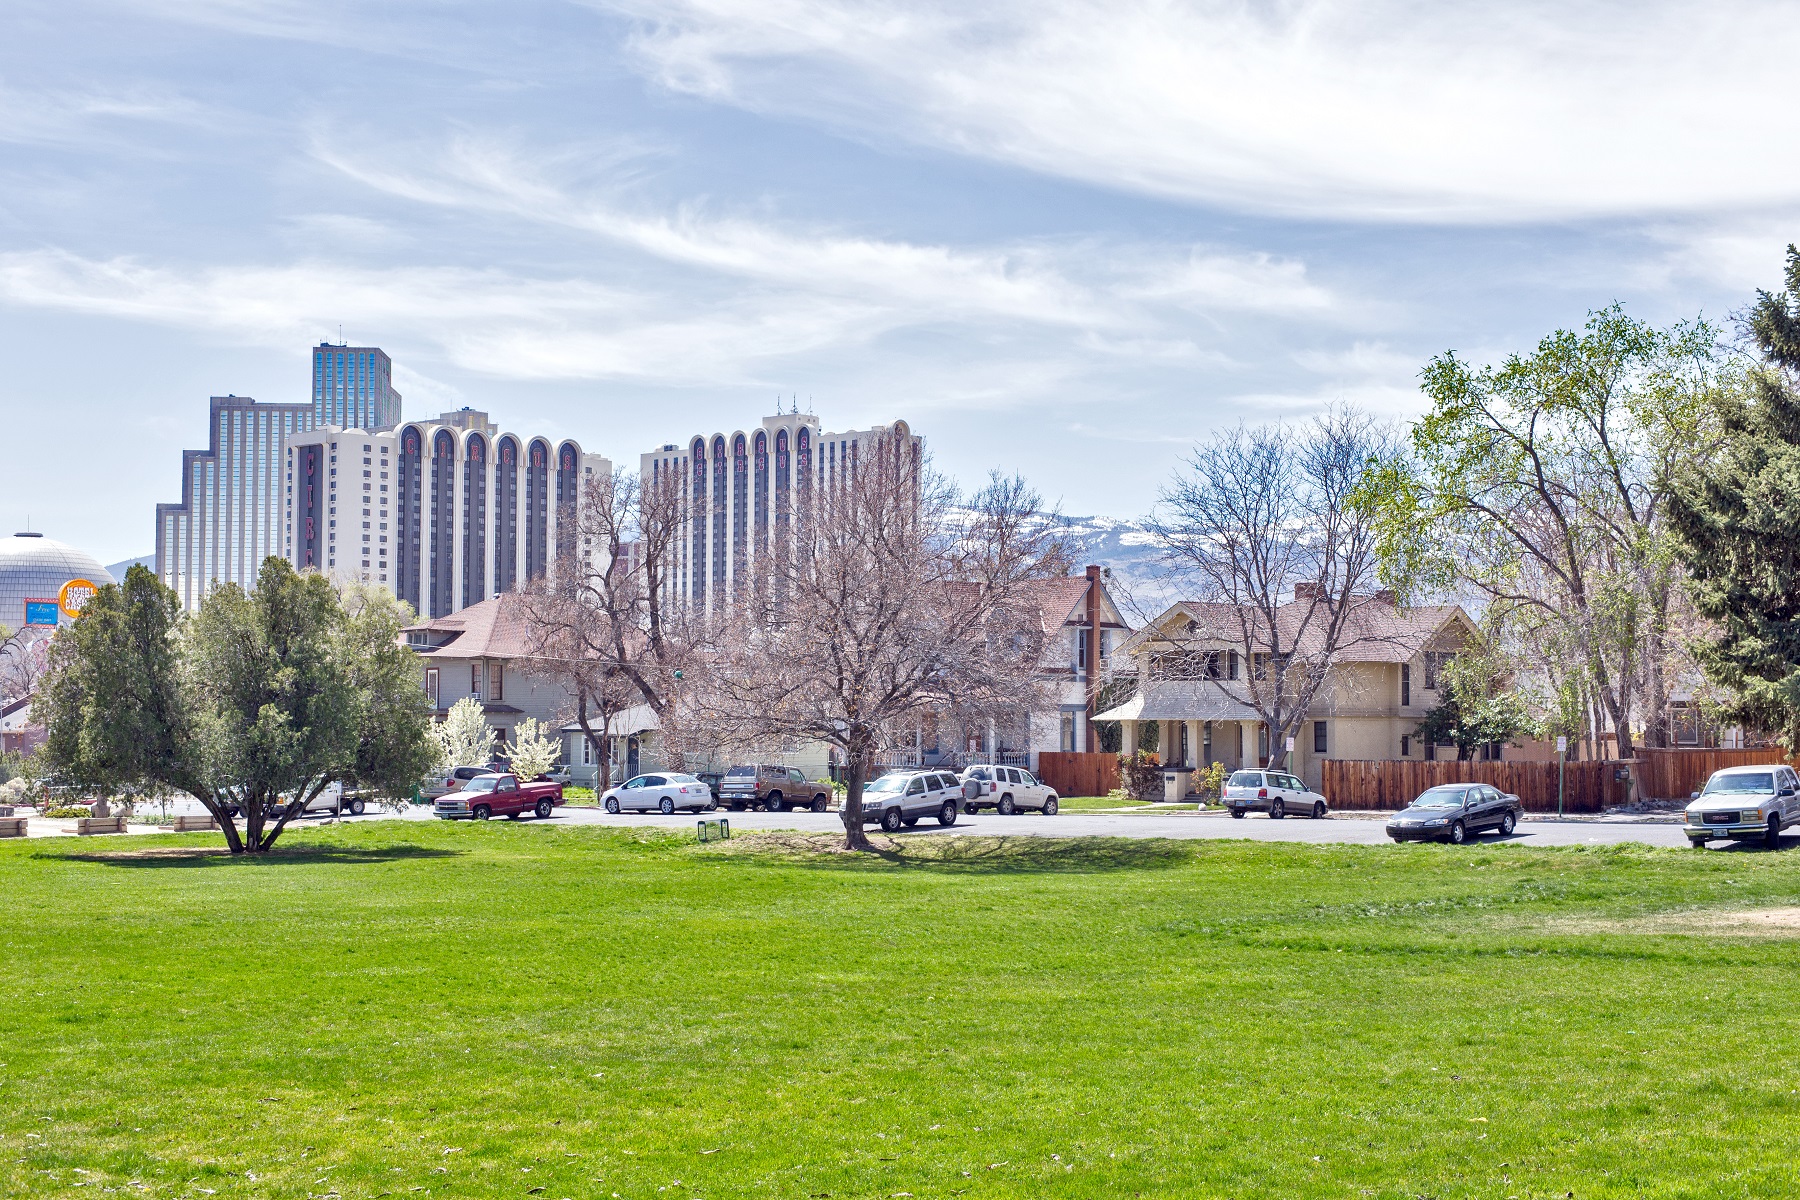 This vibrant photo show Evans Park in the summer with Downtown Reno in the background.